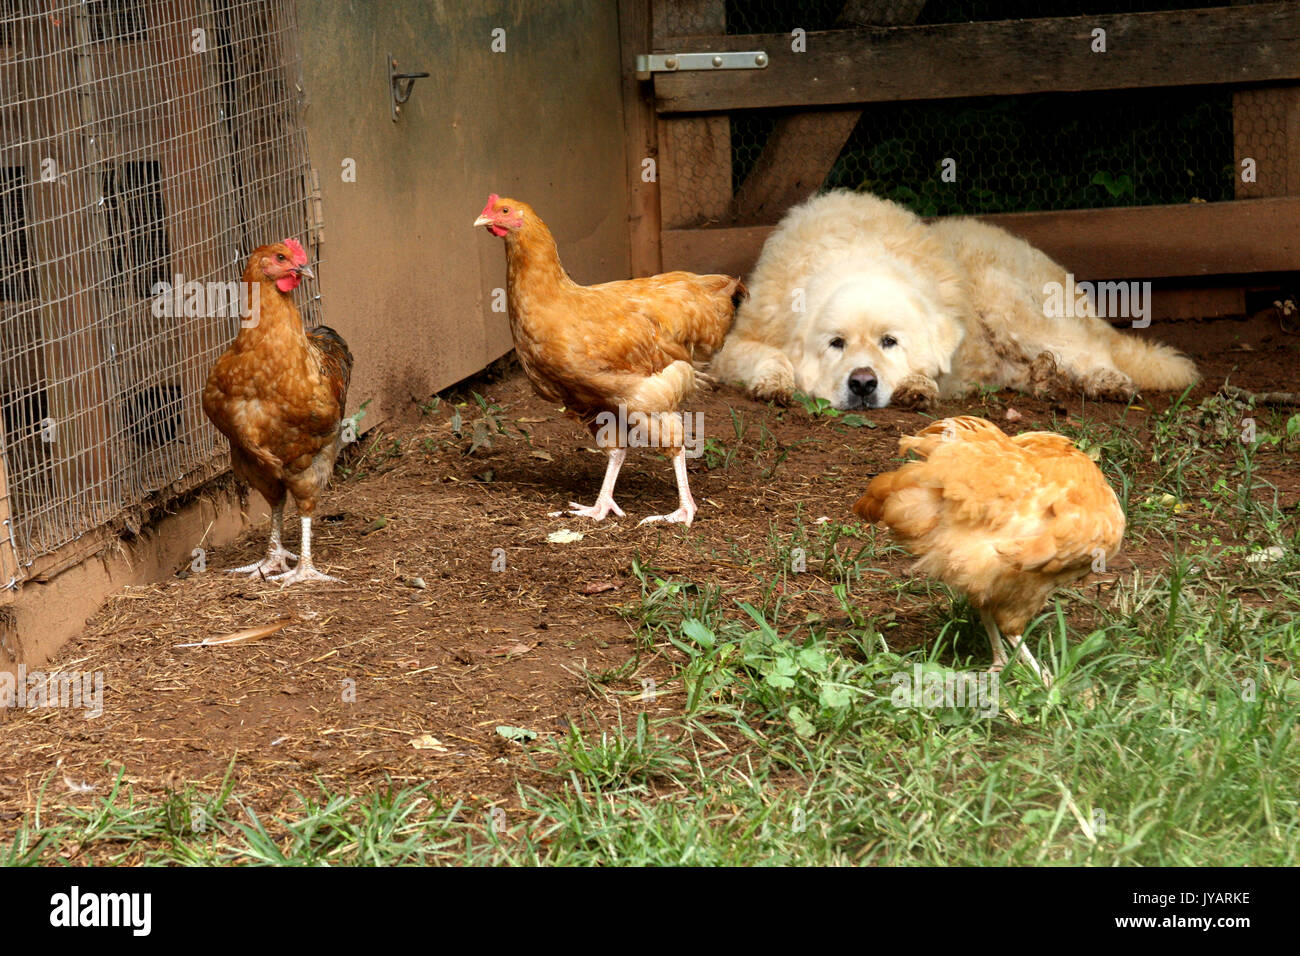 Large dog and three hens in yard Stock Photo